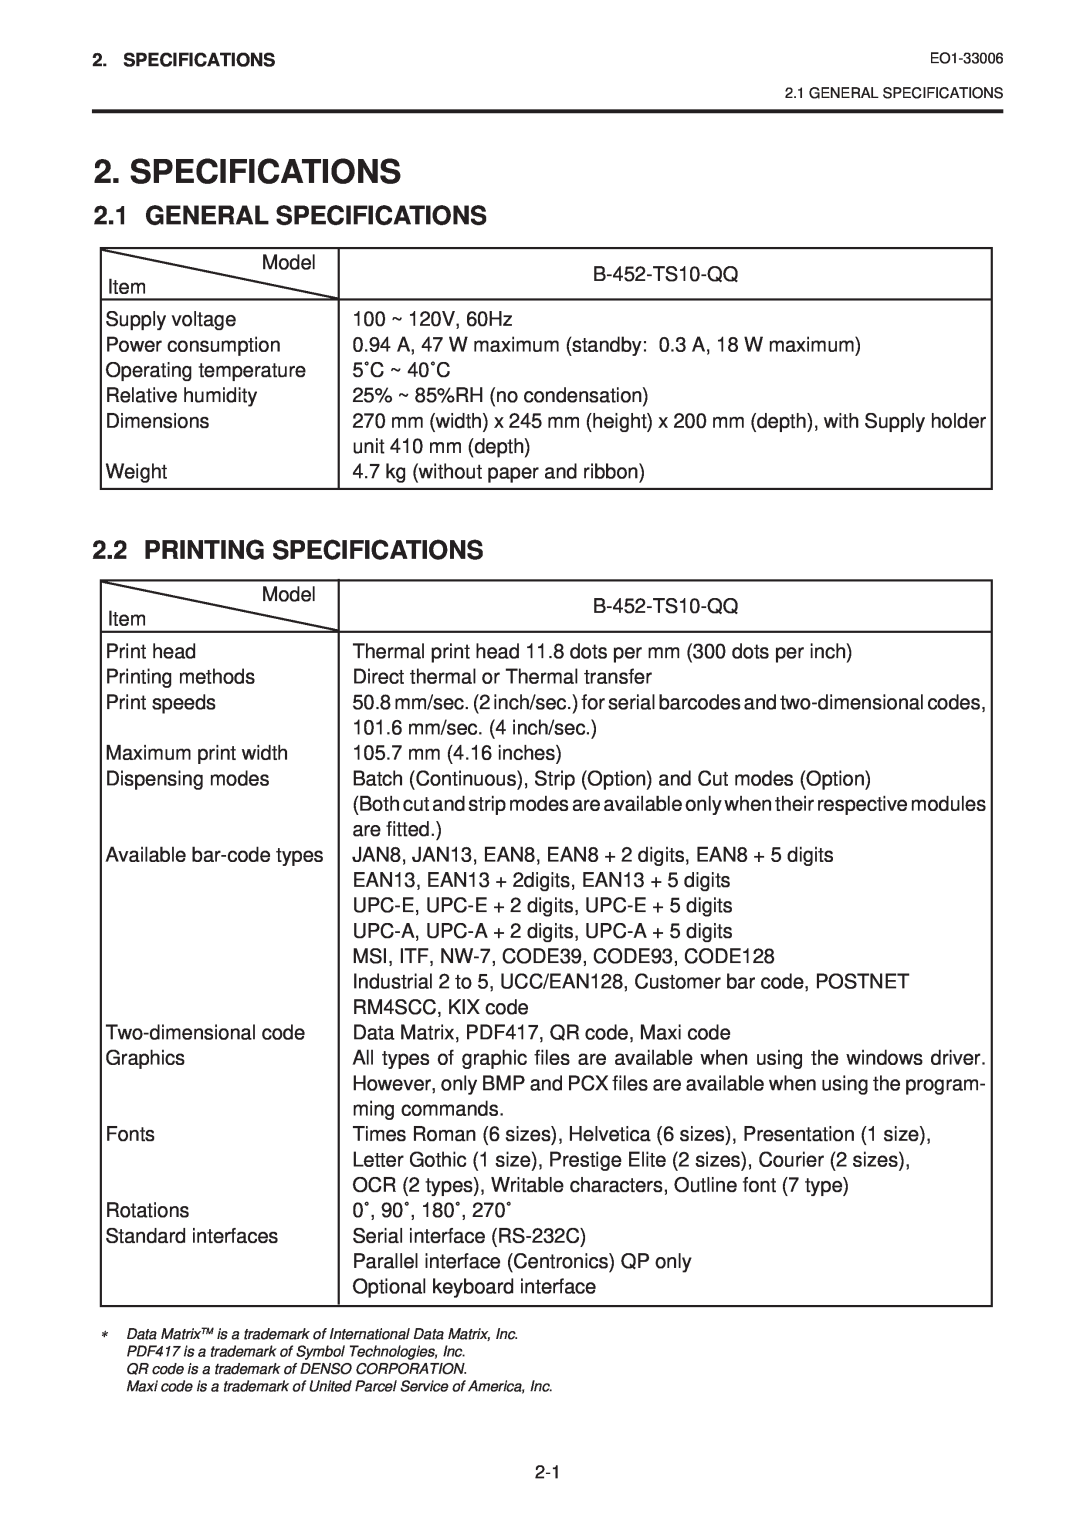 Toshiba B-450-QQ owner manual General Specifications, Printing Specifications 